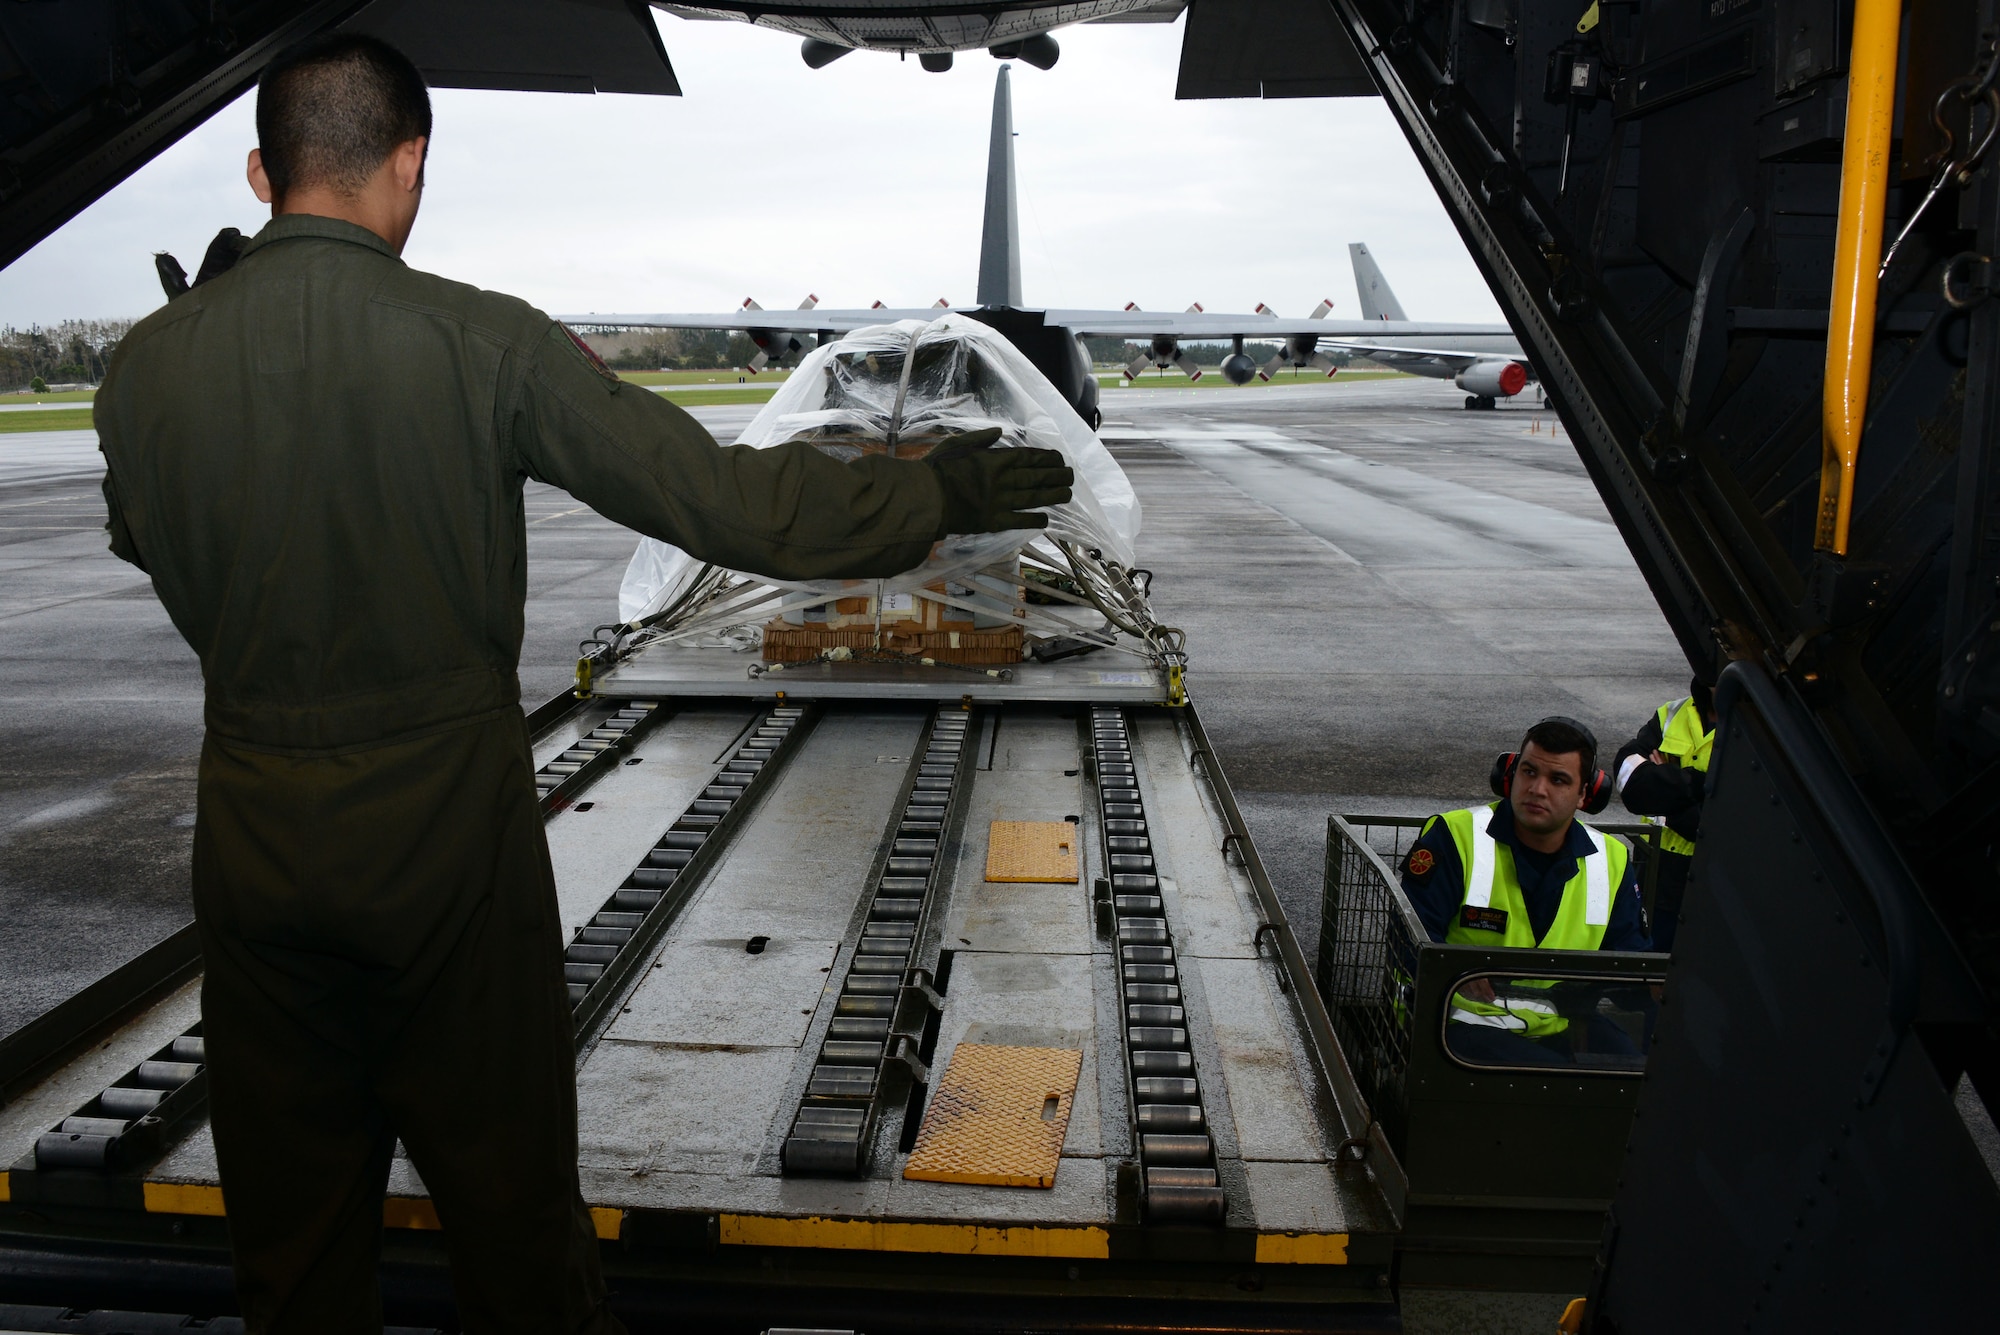 A loadmaster at the 1st Special Operations Squadron, works with a member from the Royal New Zealand Air Force Force to load a heavy equipment platform for an air drop June 20, 2016.  Members from the 353rd Special Operations Group participated in Exercise Teak Net June 12 through June 30 in Whenuapai, New Zealand. During the exercise, members from both the New Zealand Defense Force and U.S. Air Force worked together to conduct personnel and equipment air drops while exchanging new techniques. (U.S. Air Force photo by Master Sgt. Kristine Dreyer)